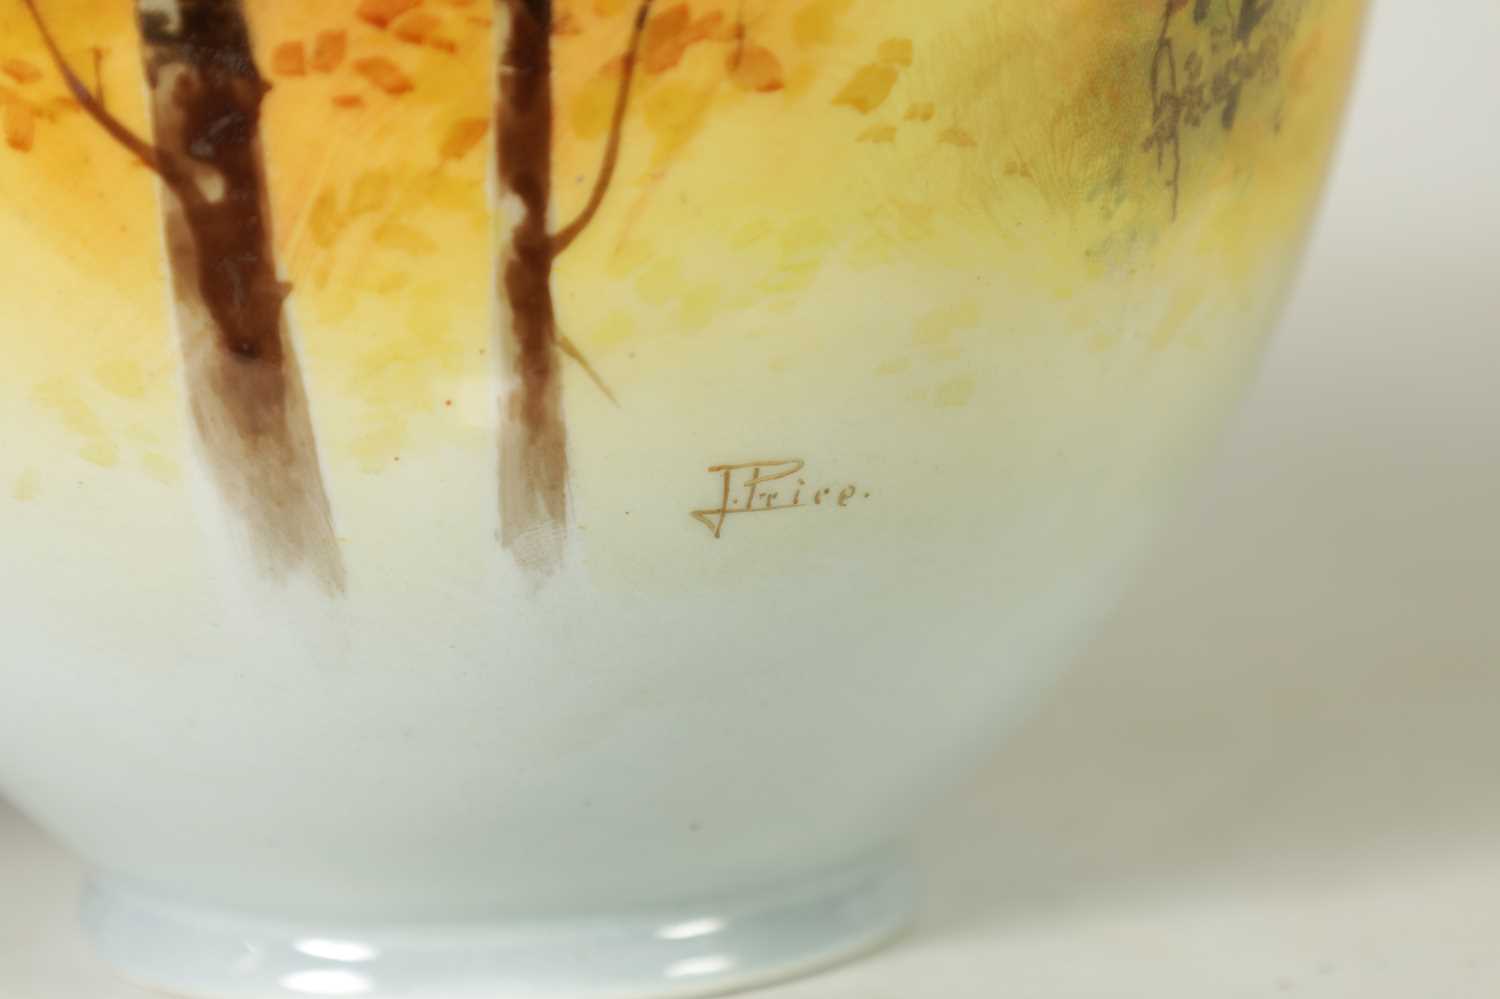 A PAIR OF ROYAL DOULTON PRINTED WARE BULBOUS SHOULDERED VASES SIGNED J PRICE - Image 7 of 10